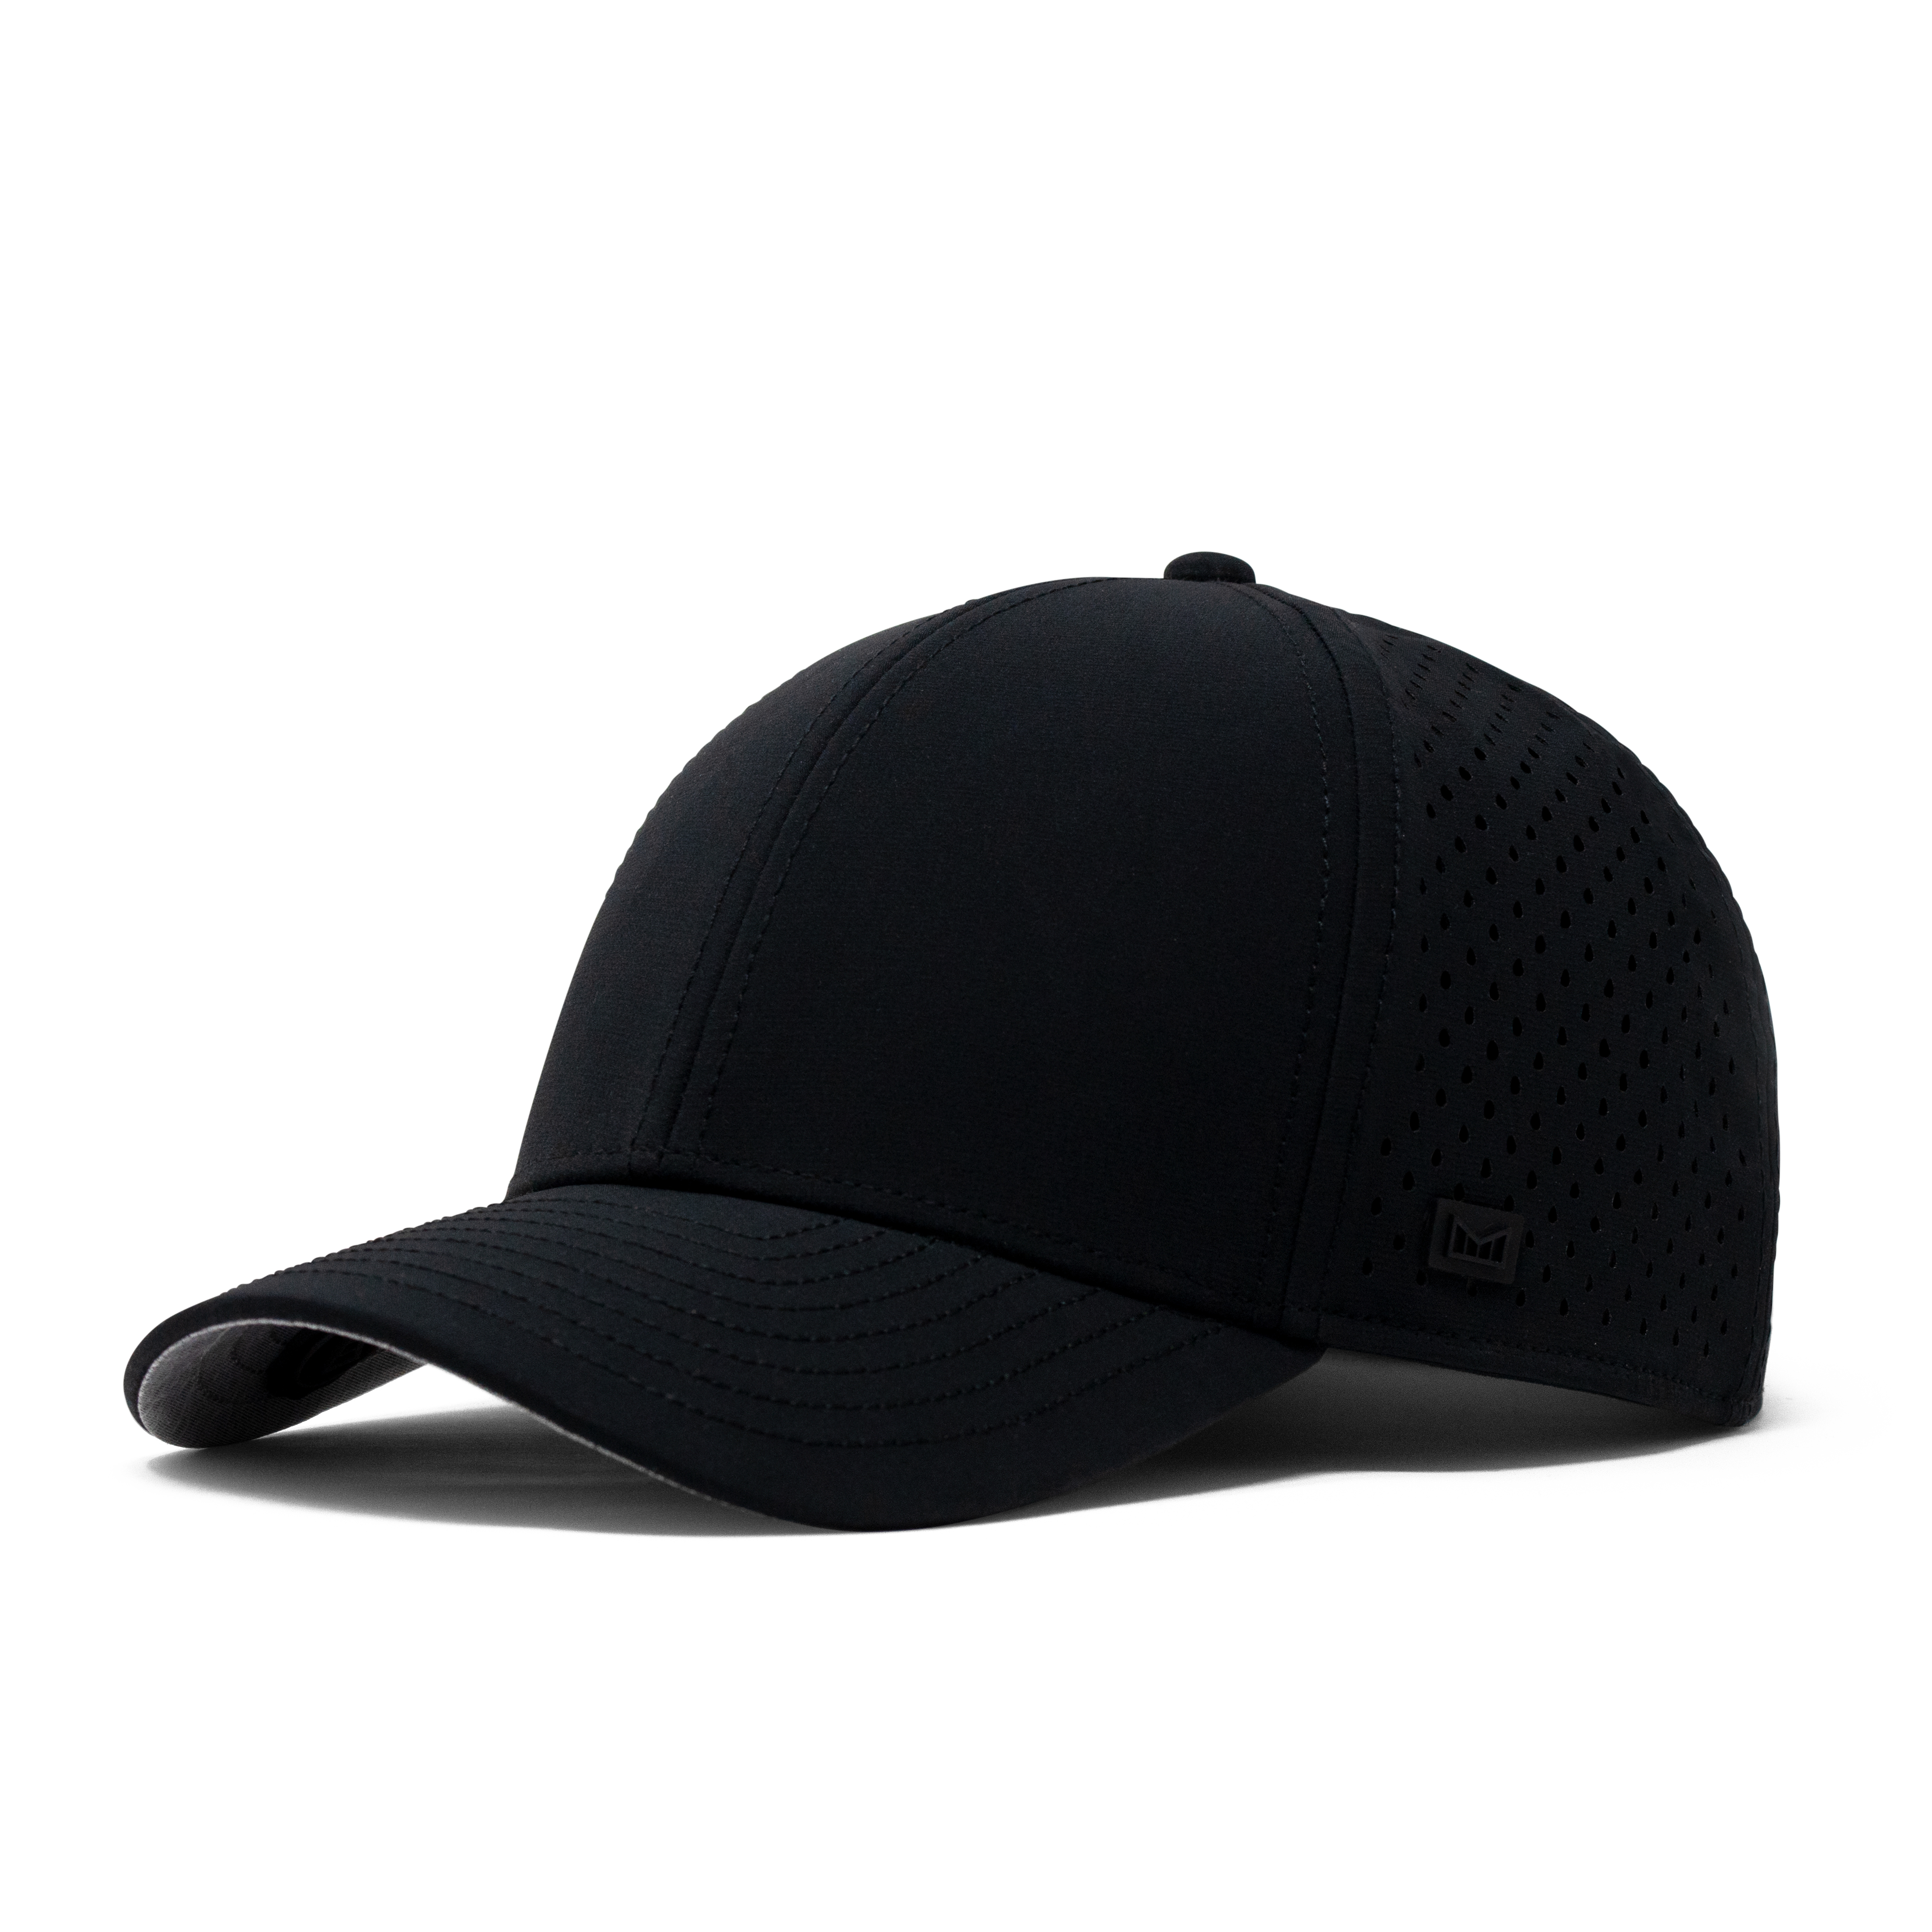 Melin A-Game Hydro Hat - Black - Small